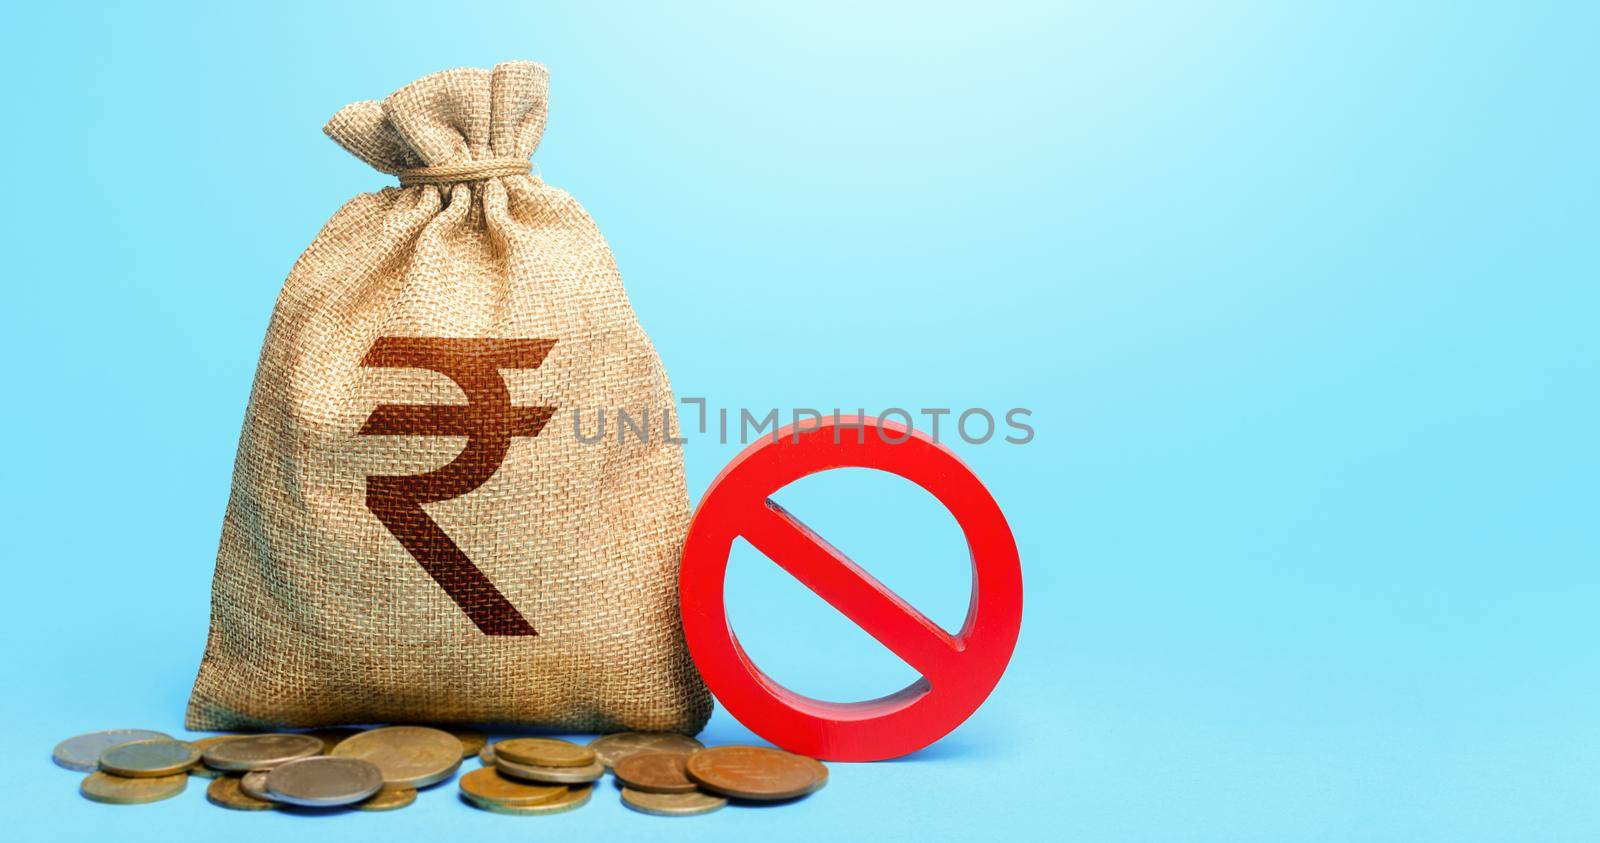 Indian rupee money bag and red prohibition sign NO. Monetary restrictions, freezing of bank accounts. Termination projects. Monitoring suspicious money flows. Confiscation of deposits.